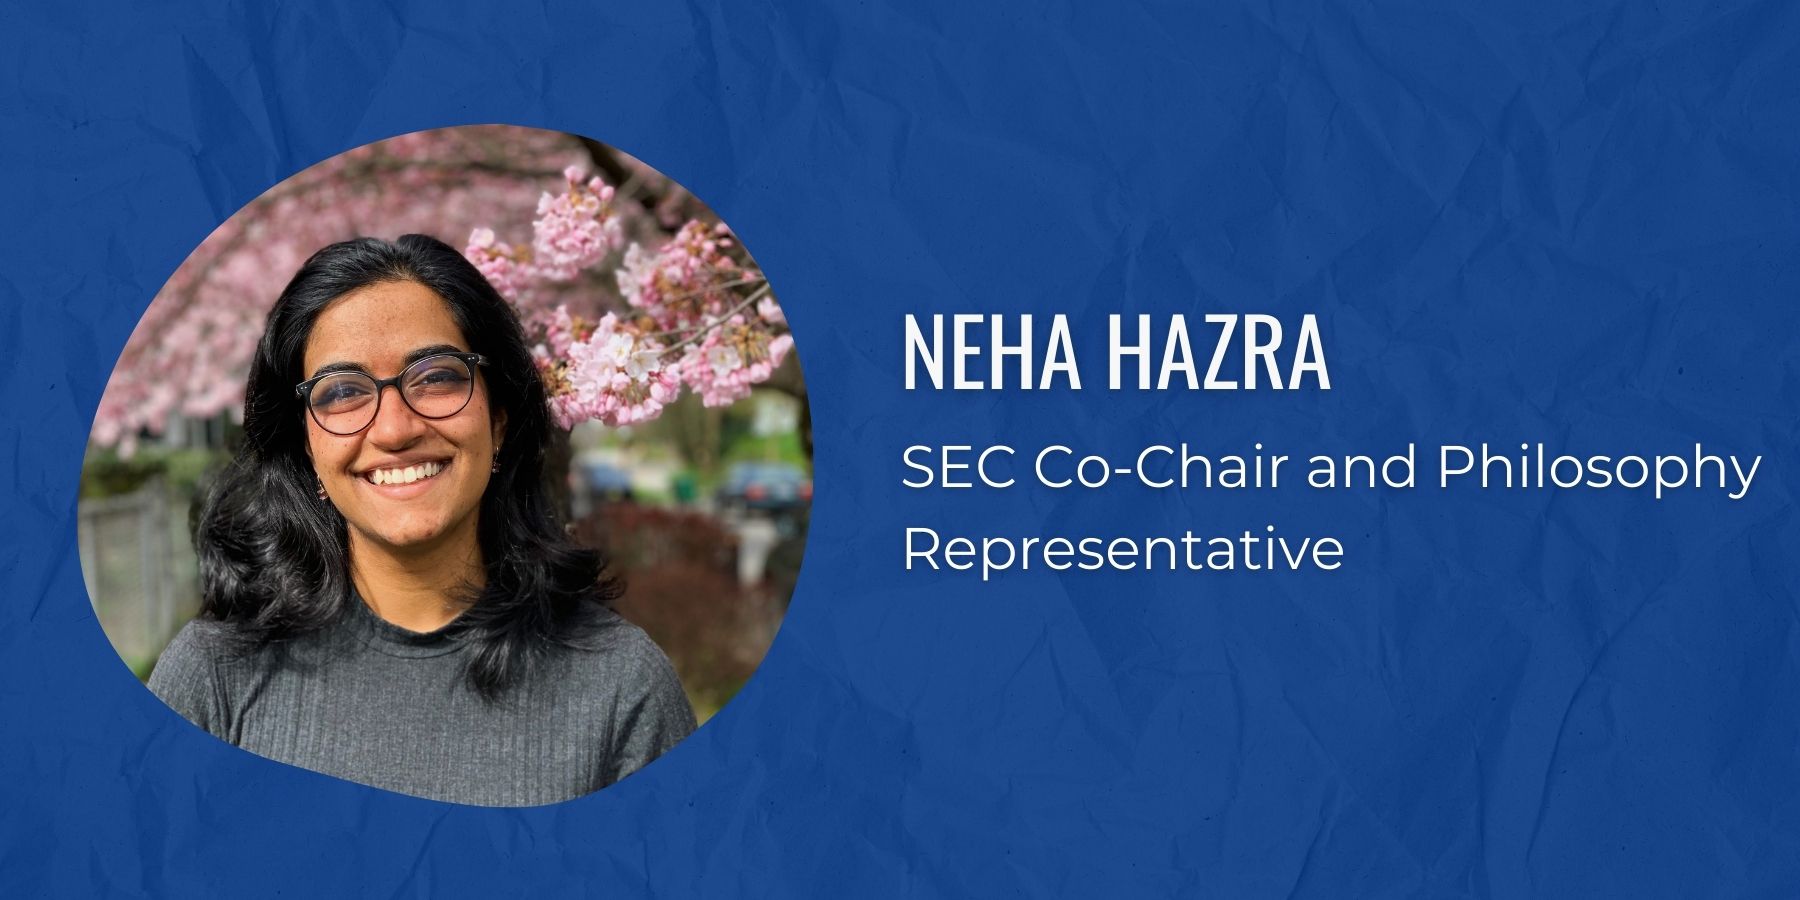 Photo of Neha Hazra and text: SEC Co-Chair and Philosophy Representative